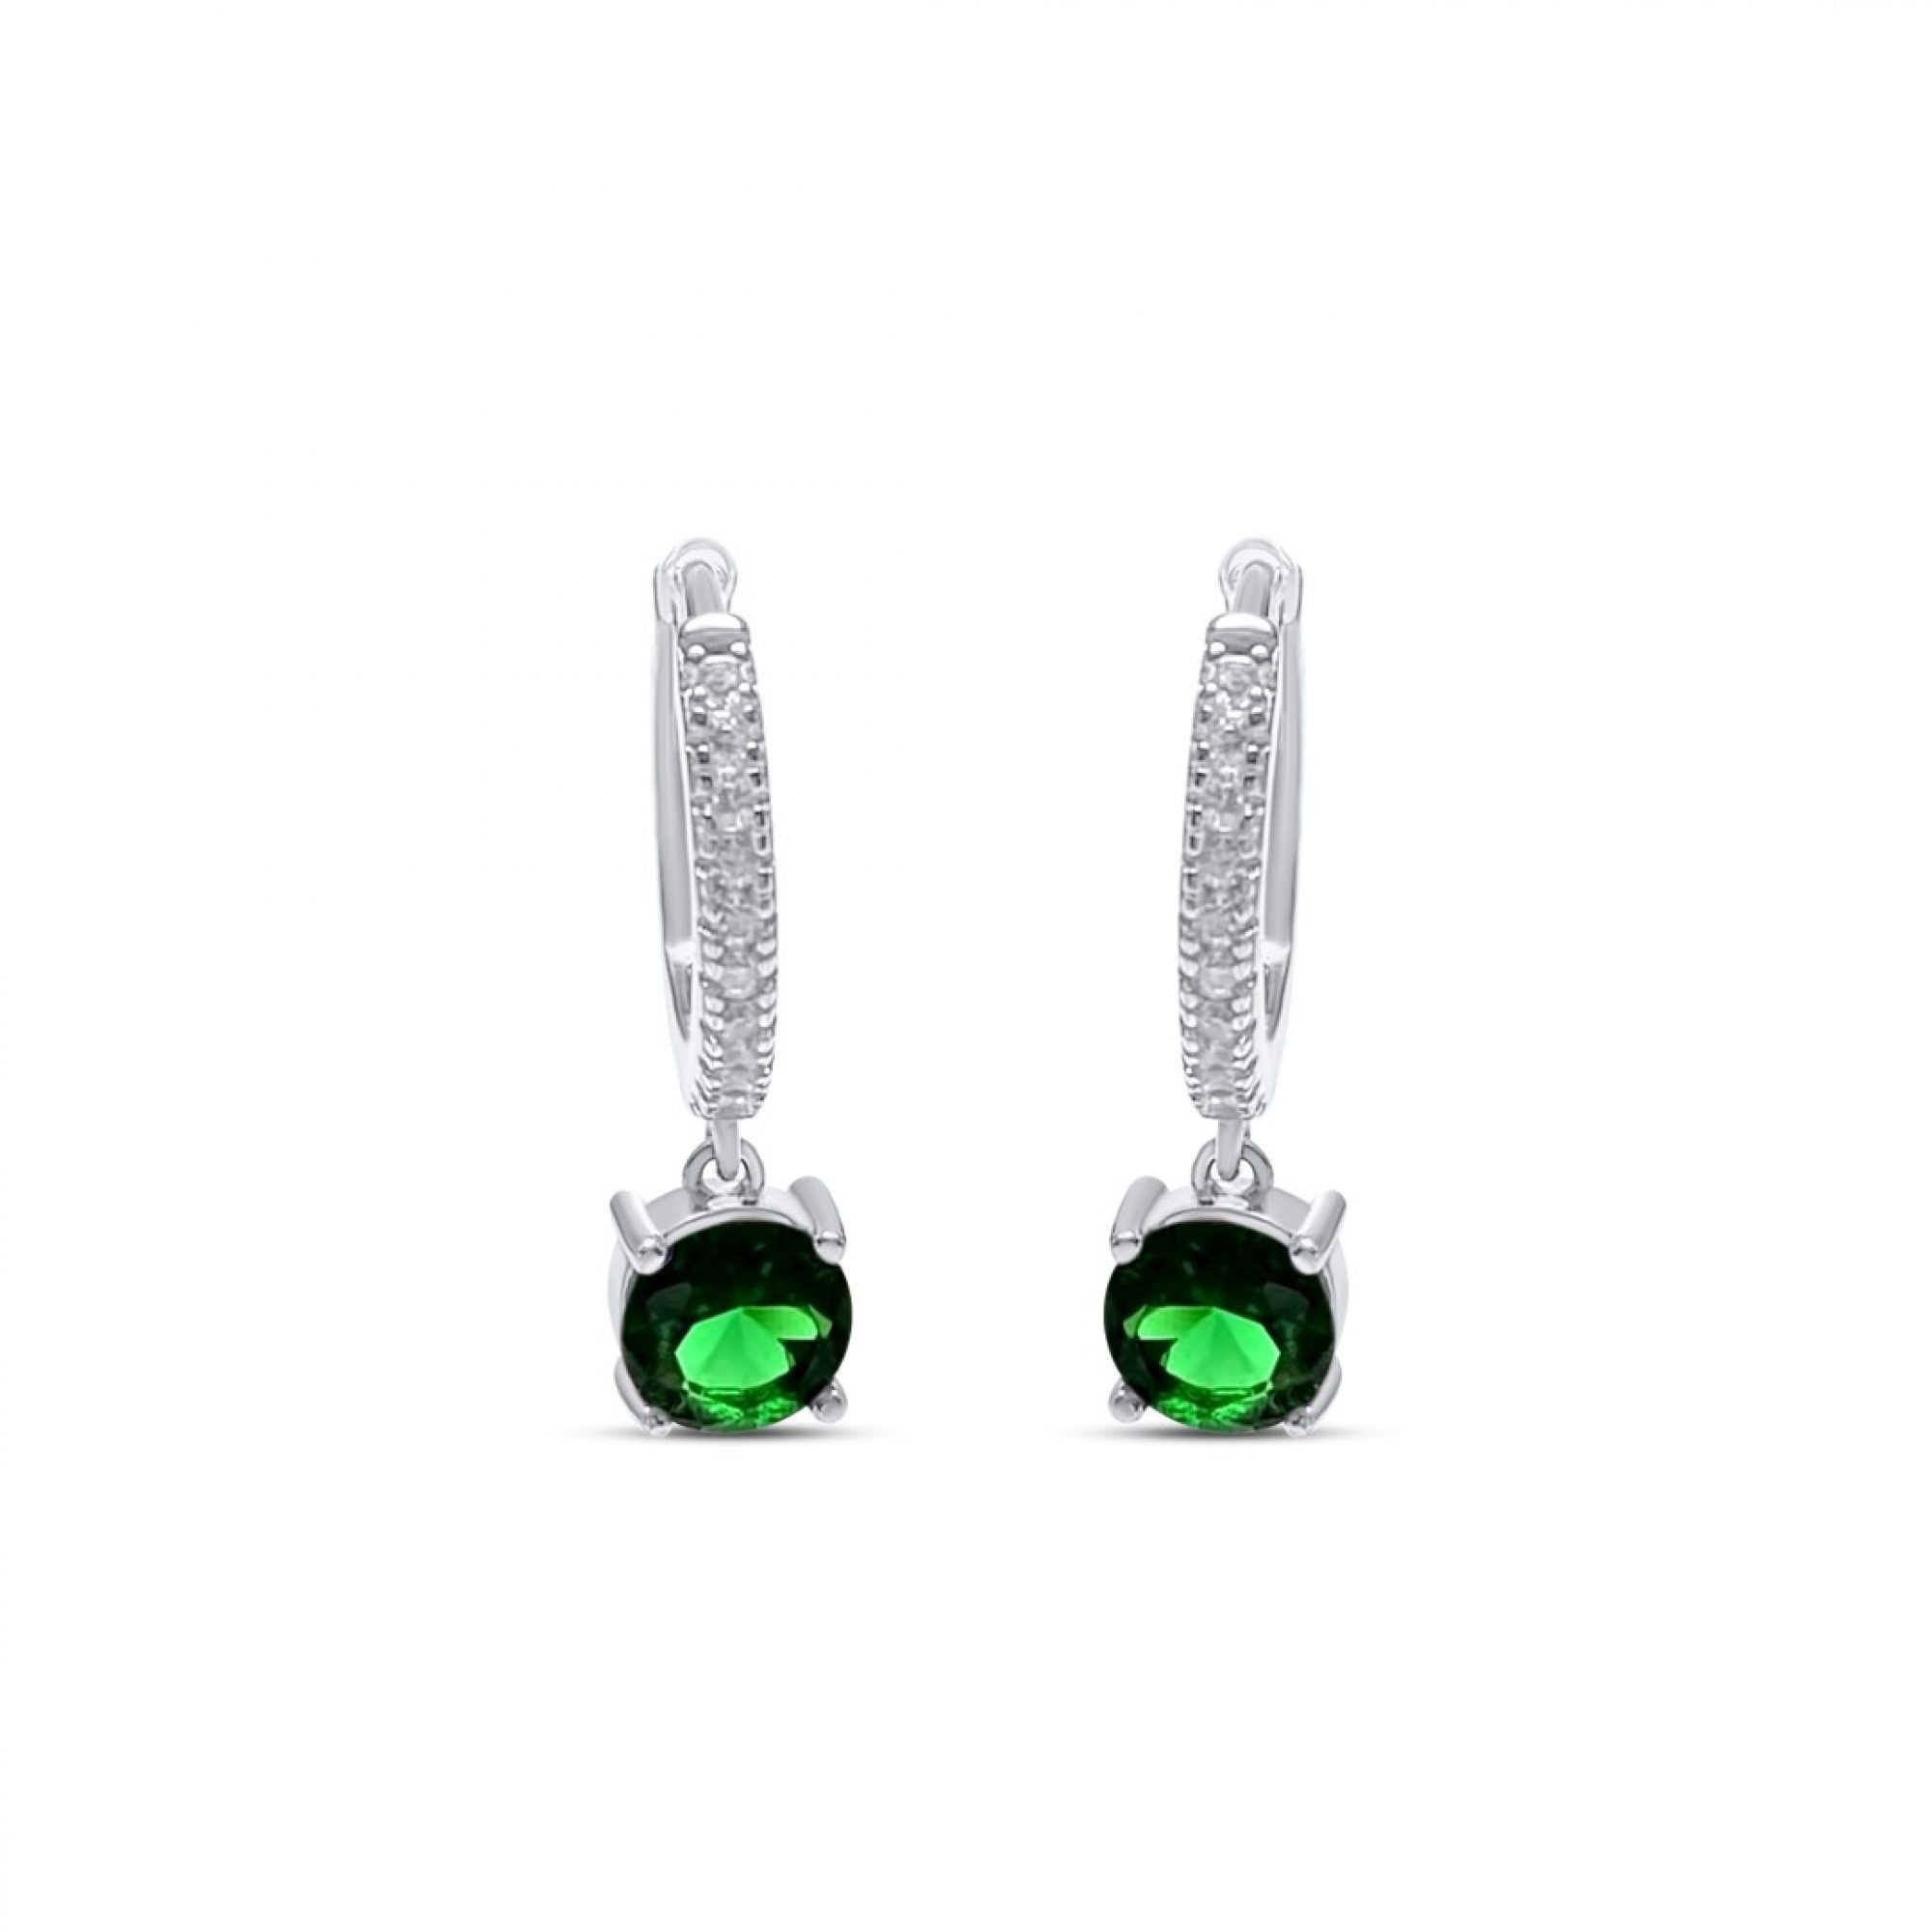 Silver earrings with emerald and zircon stones